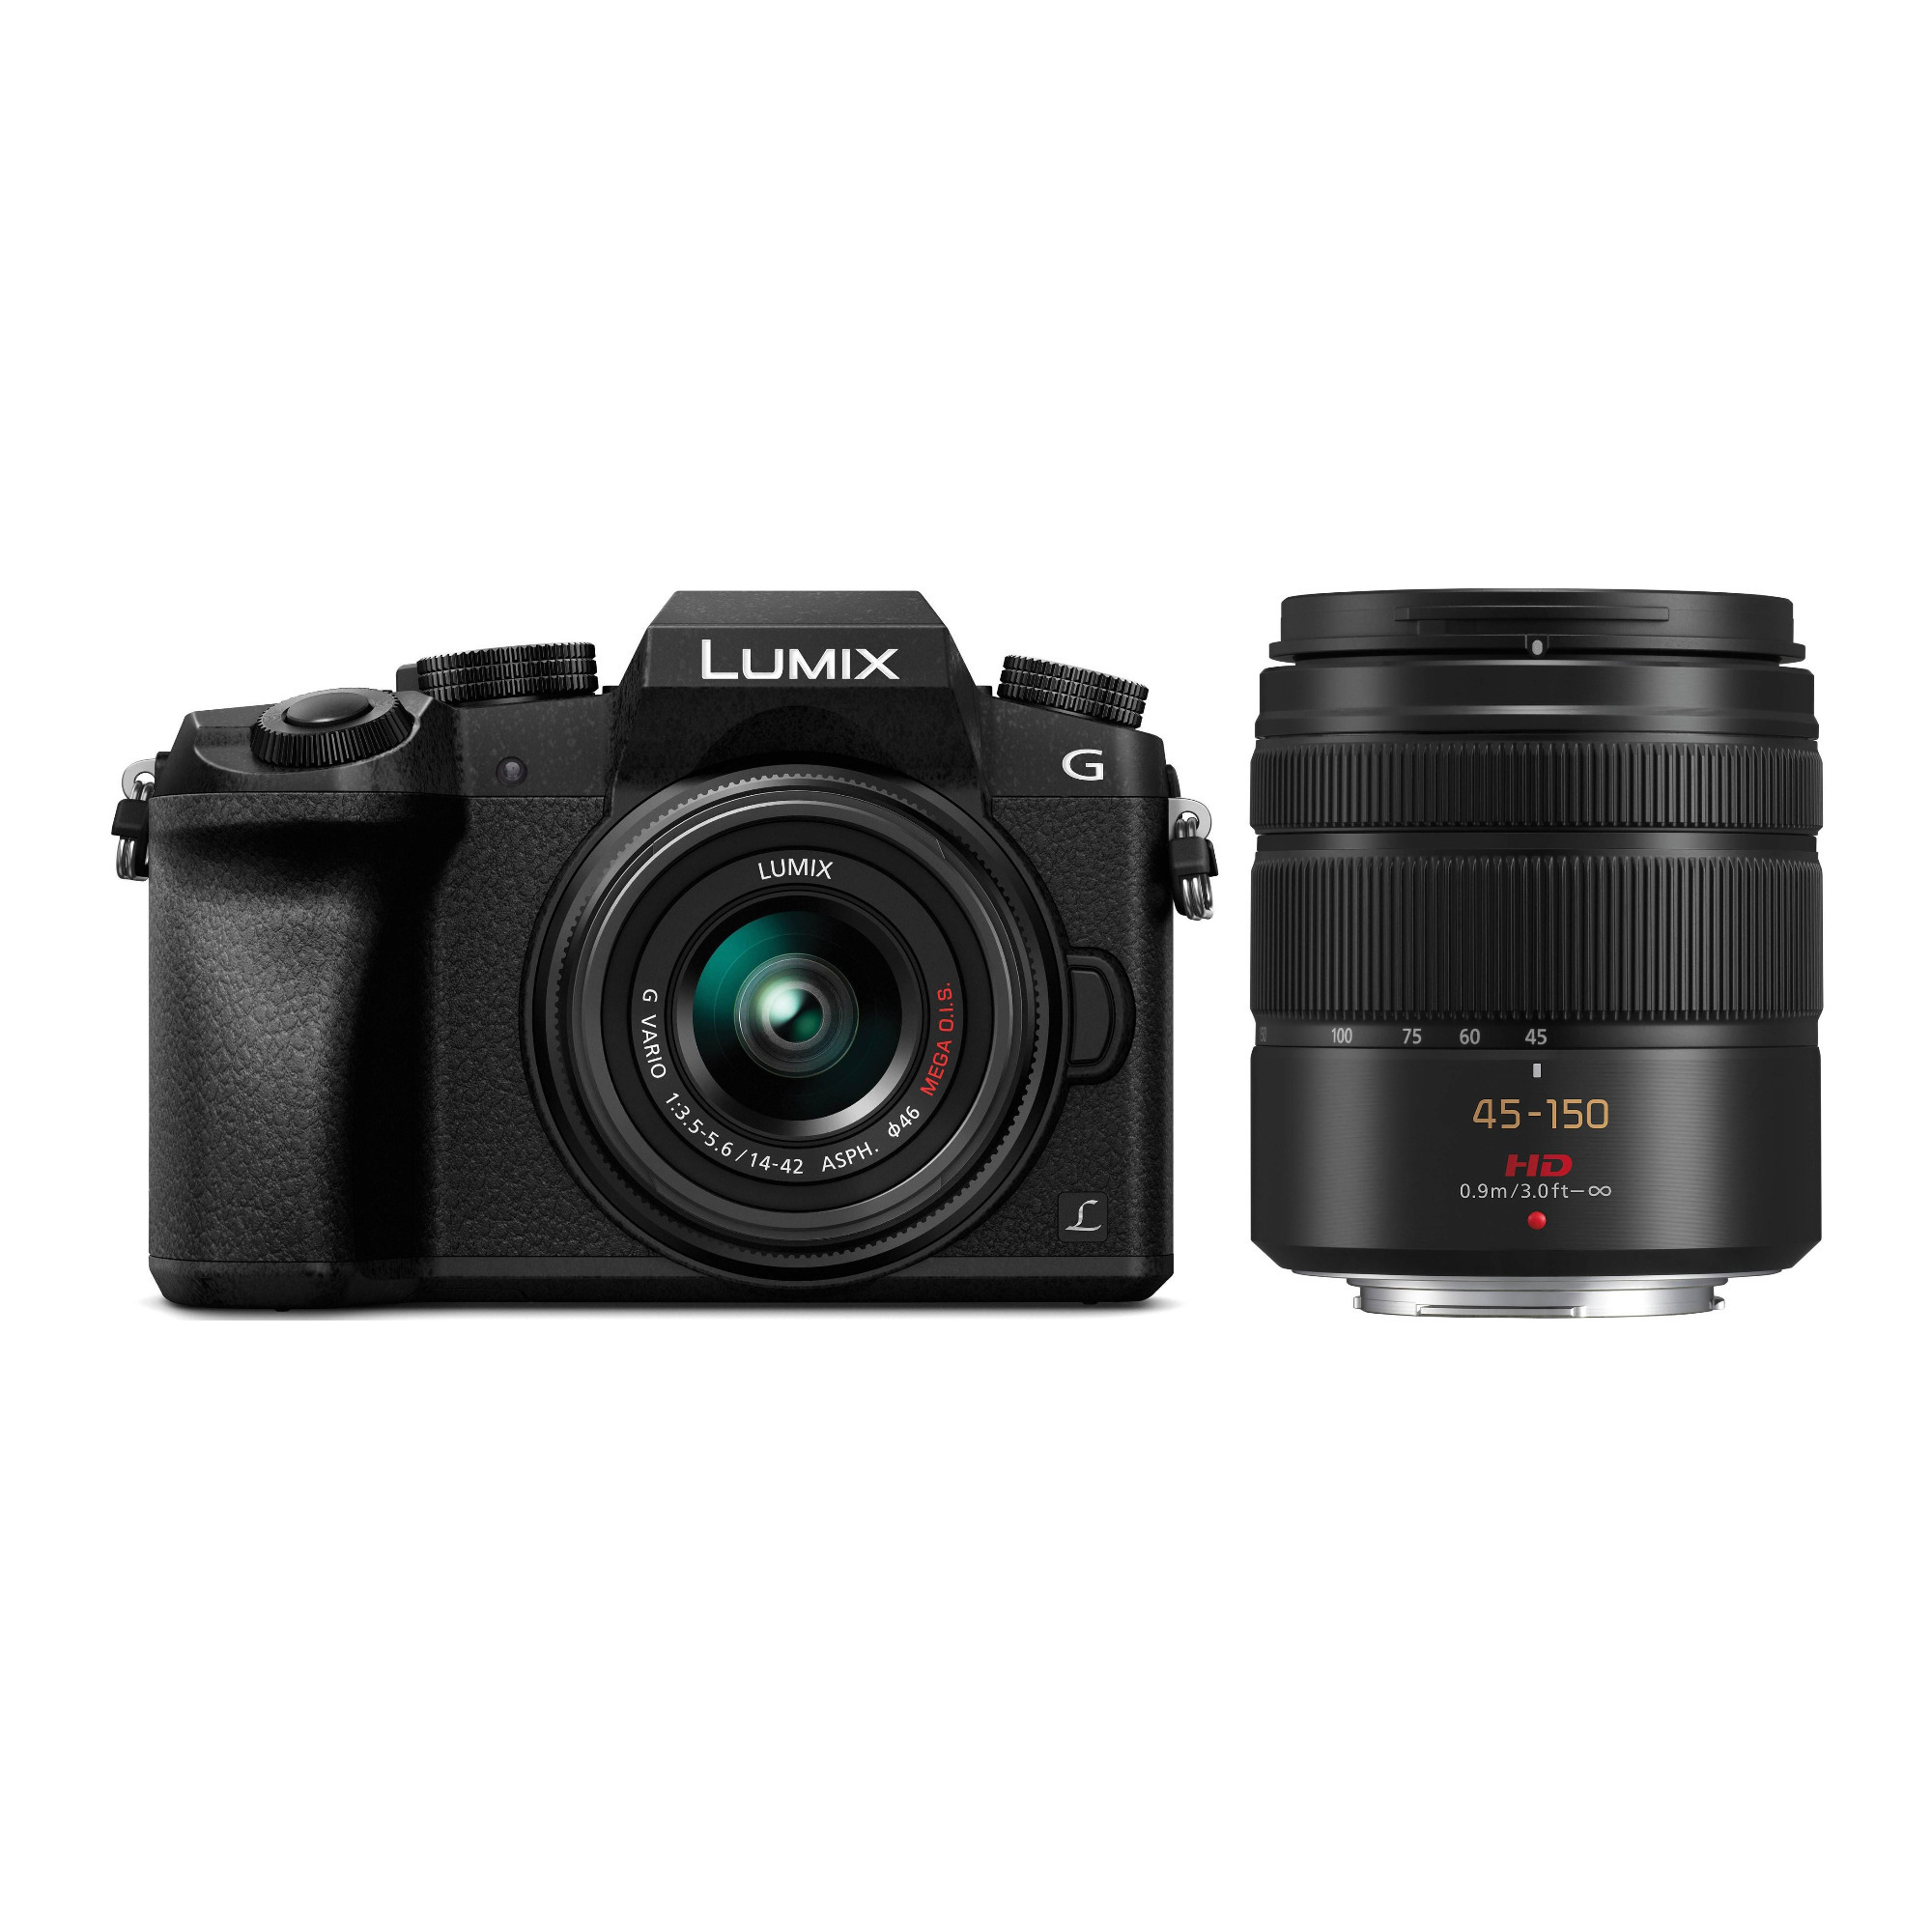 Panasonic LUMIX DMC-G7 Compact System Camera Bundle with 14-42mm and 45-150mm Lenses in Black